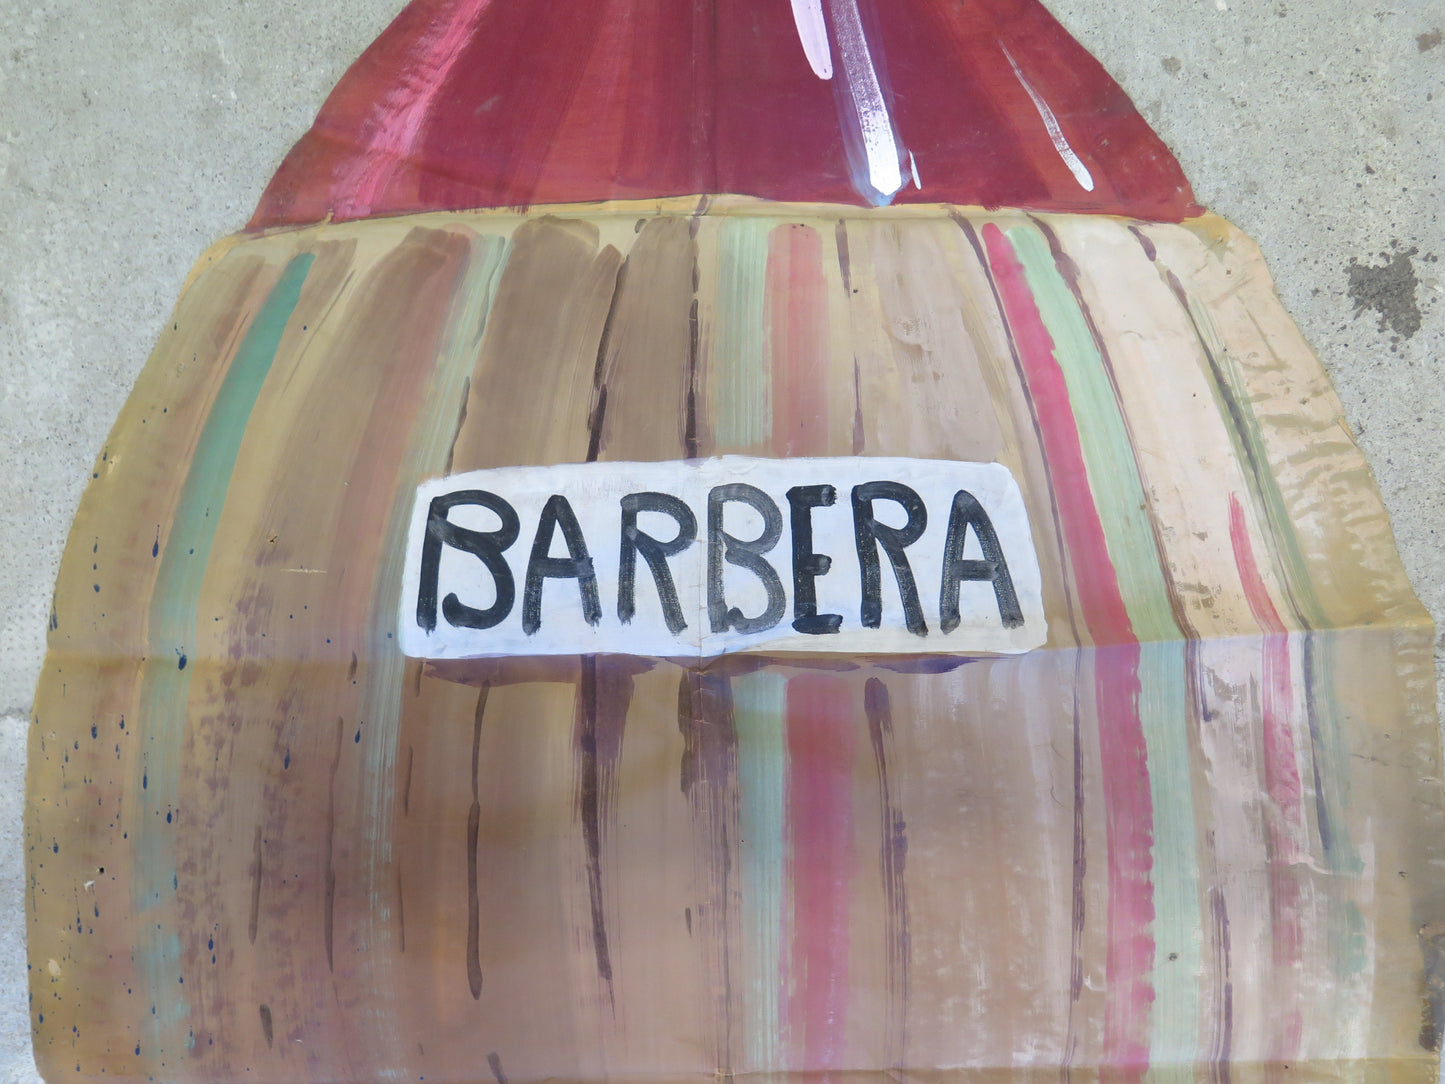 FLASCO OF BARBERA WINE LARGE BACKGROUND THEATER SCENOGRAPHY OLD BOTTLE CL1.30